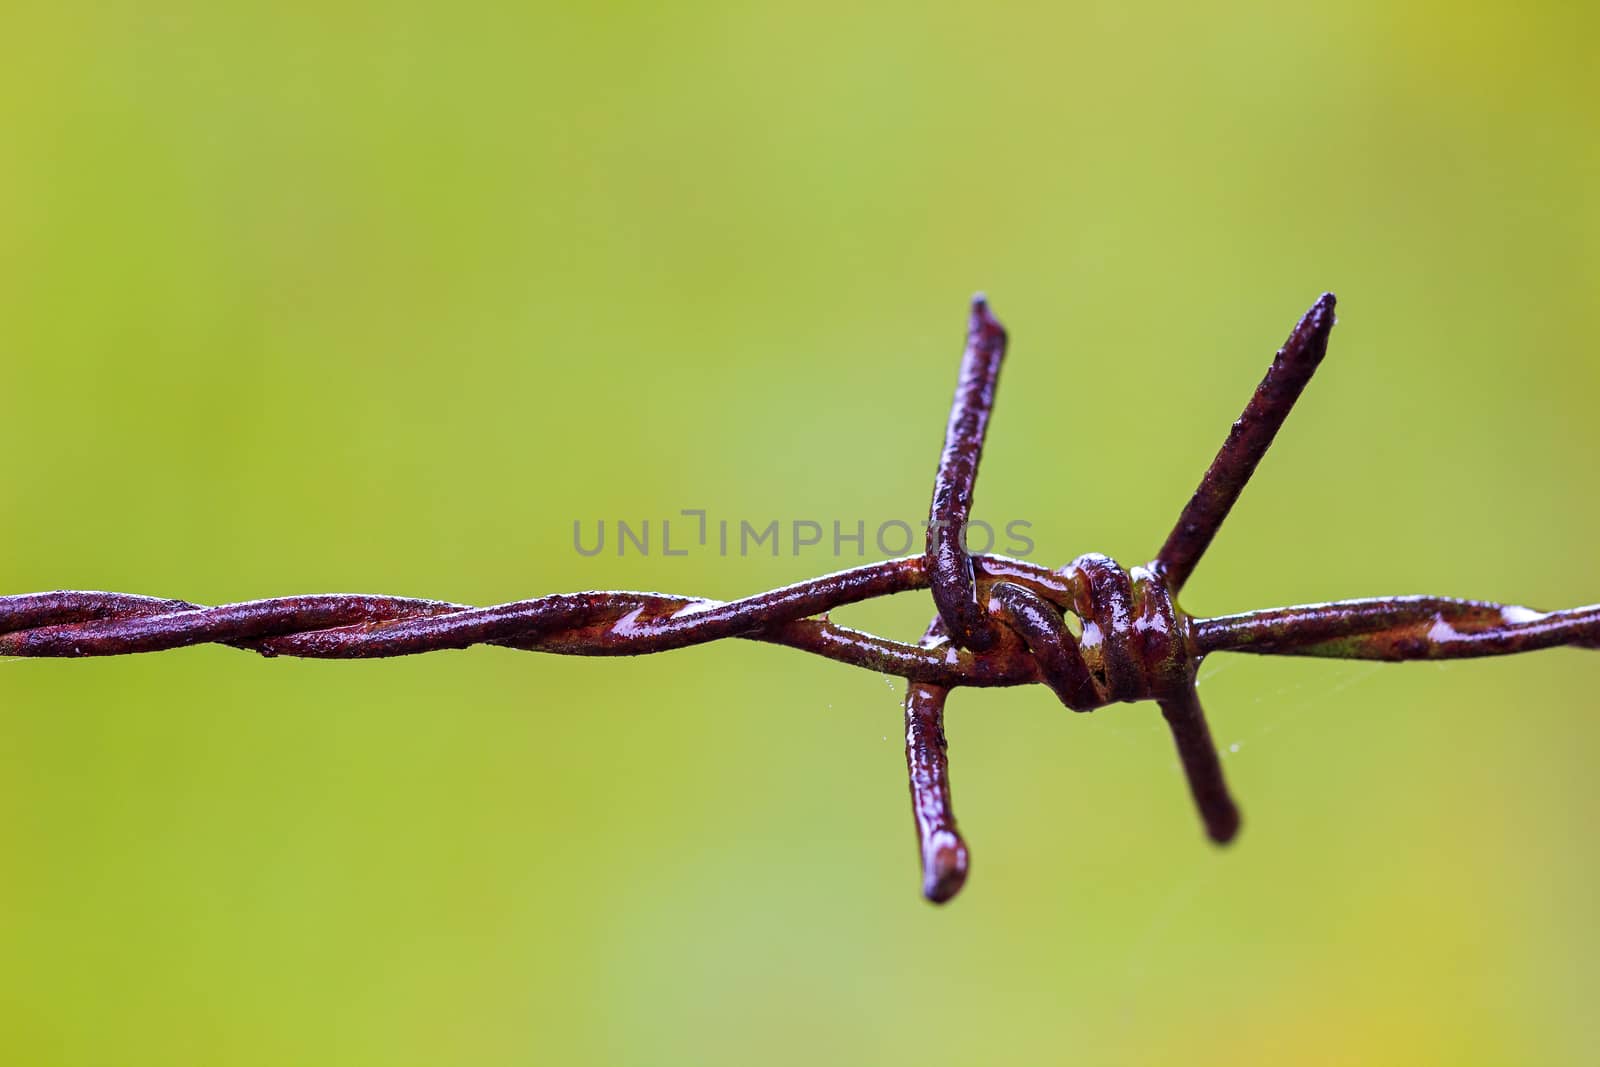 Old rusty Barbed wire fence and spider web were wet with rain and blurred natural green background.